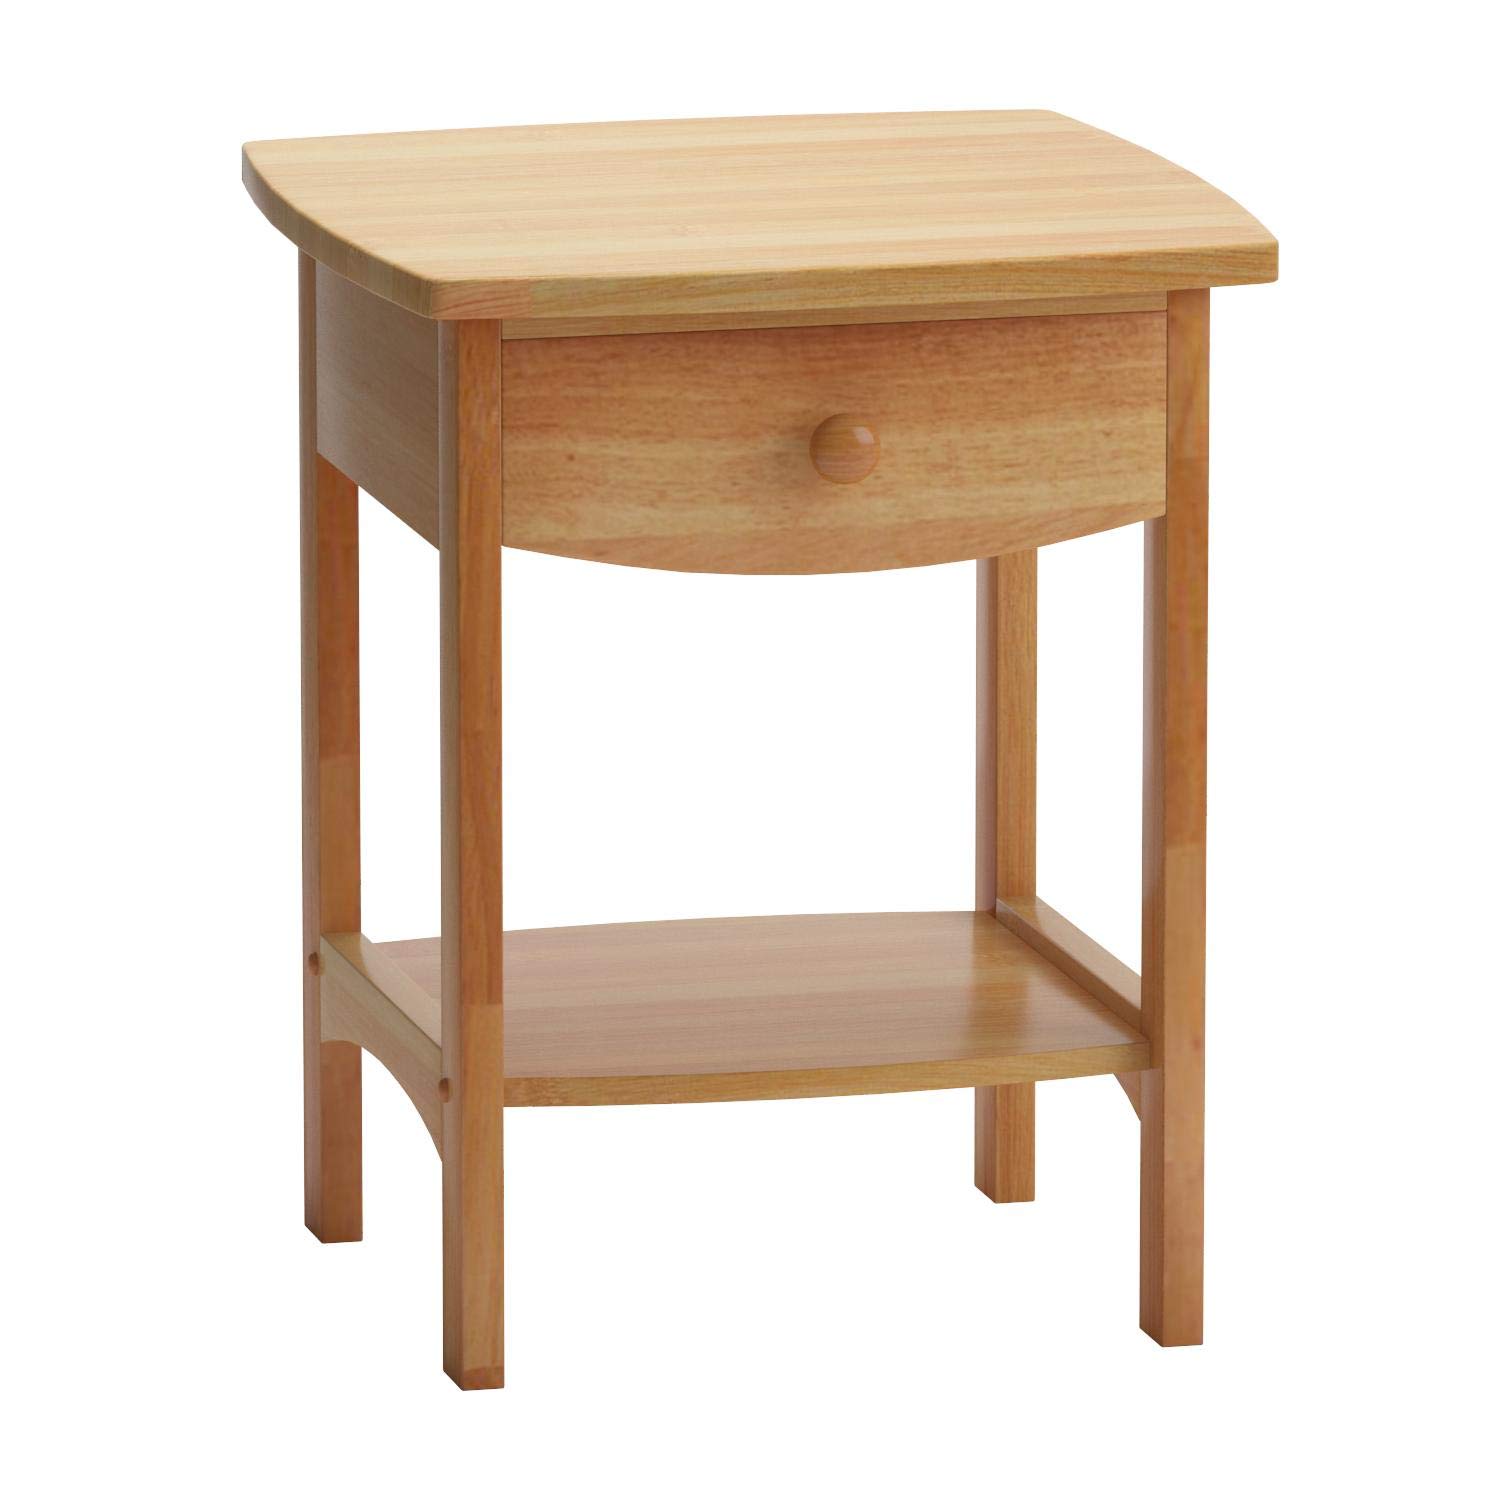 winsome wood end table night stand with drawer and shelf natural kitchen dining chairs reading mid century lift top coffee modern chair narrow patio bedroom argos accent pieces